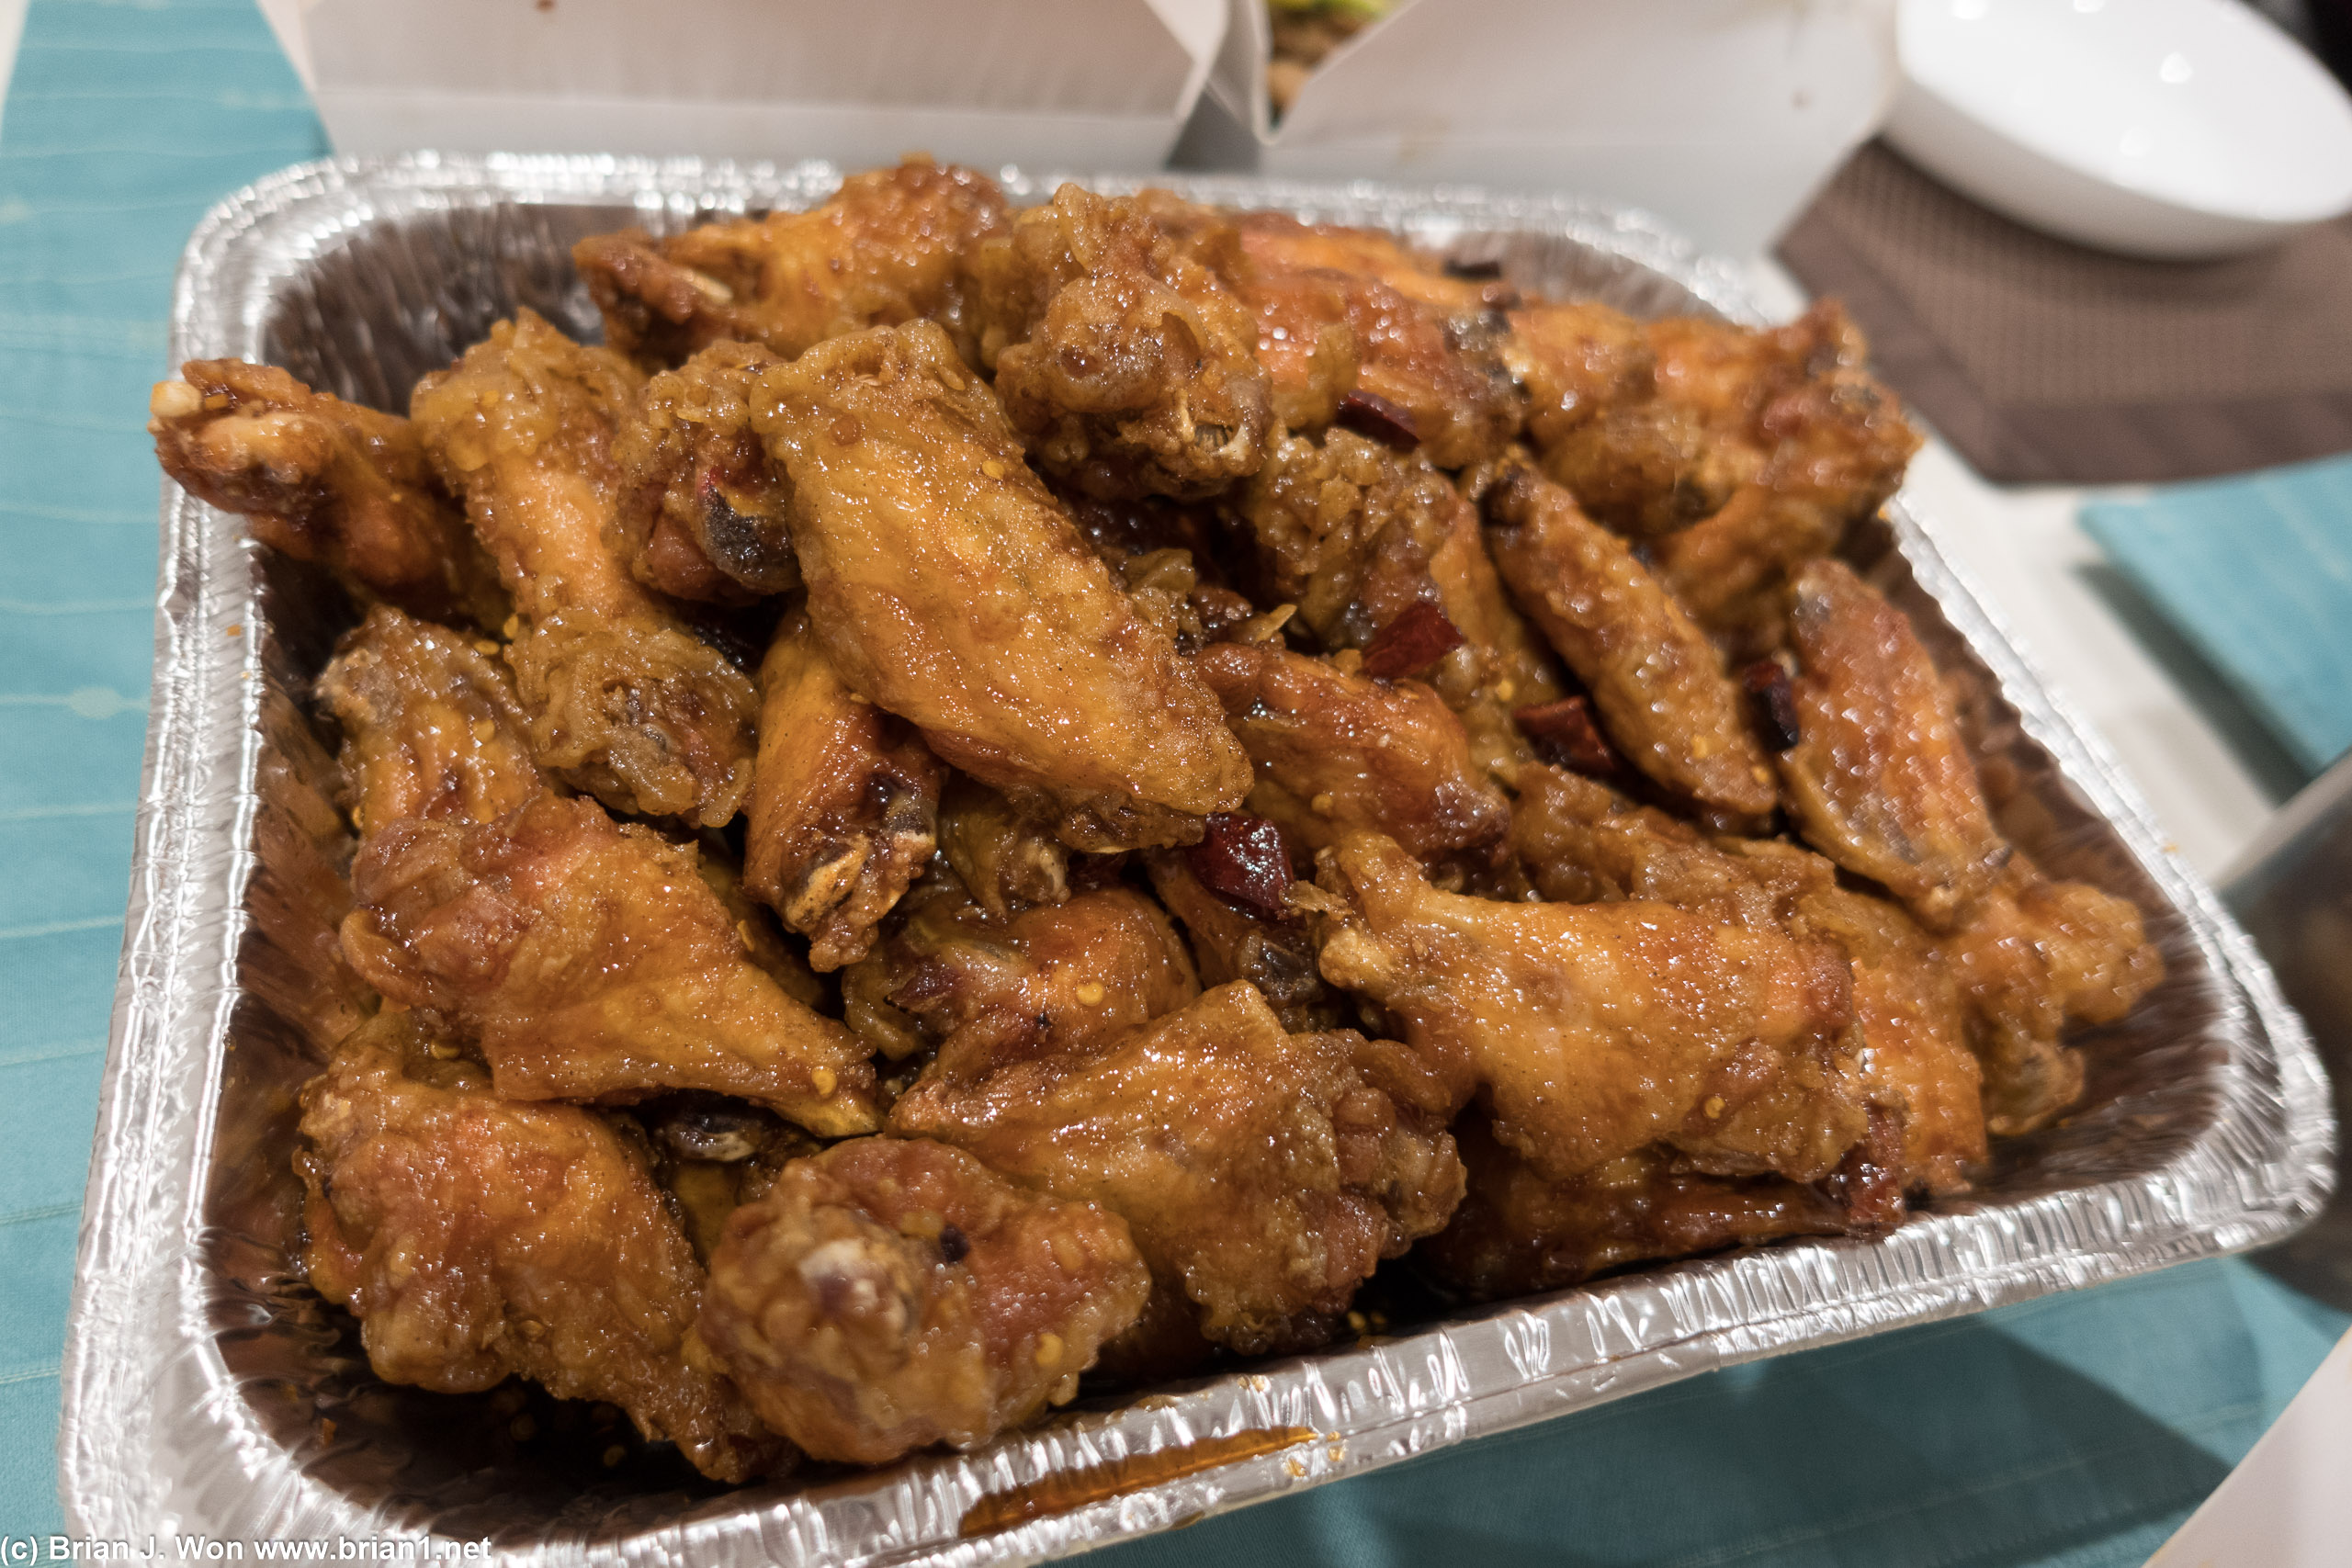 5 orders of chicken wings = party tray.